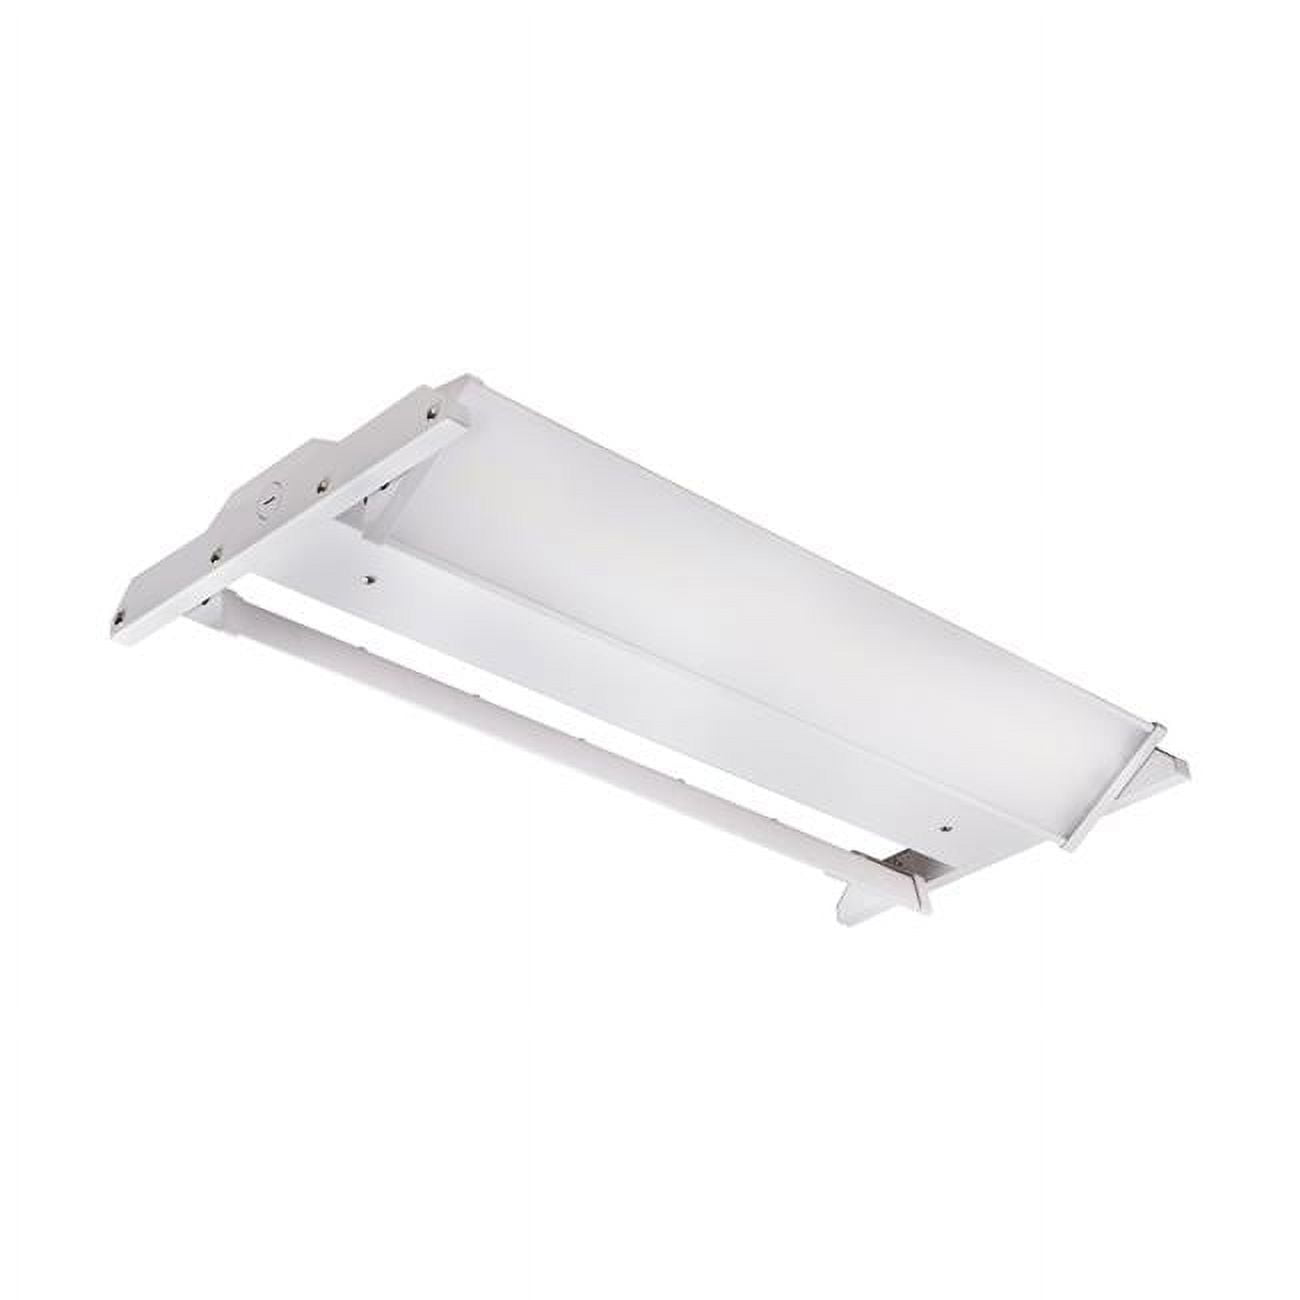 Nuvo 3008614 25.97 in. 110 watts T8 High Bay LED Fixture, White -  SATCO, 65/641